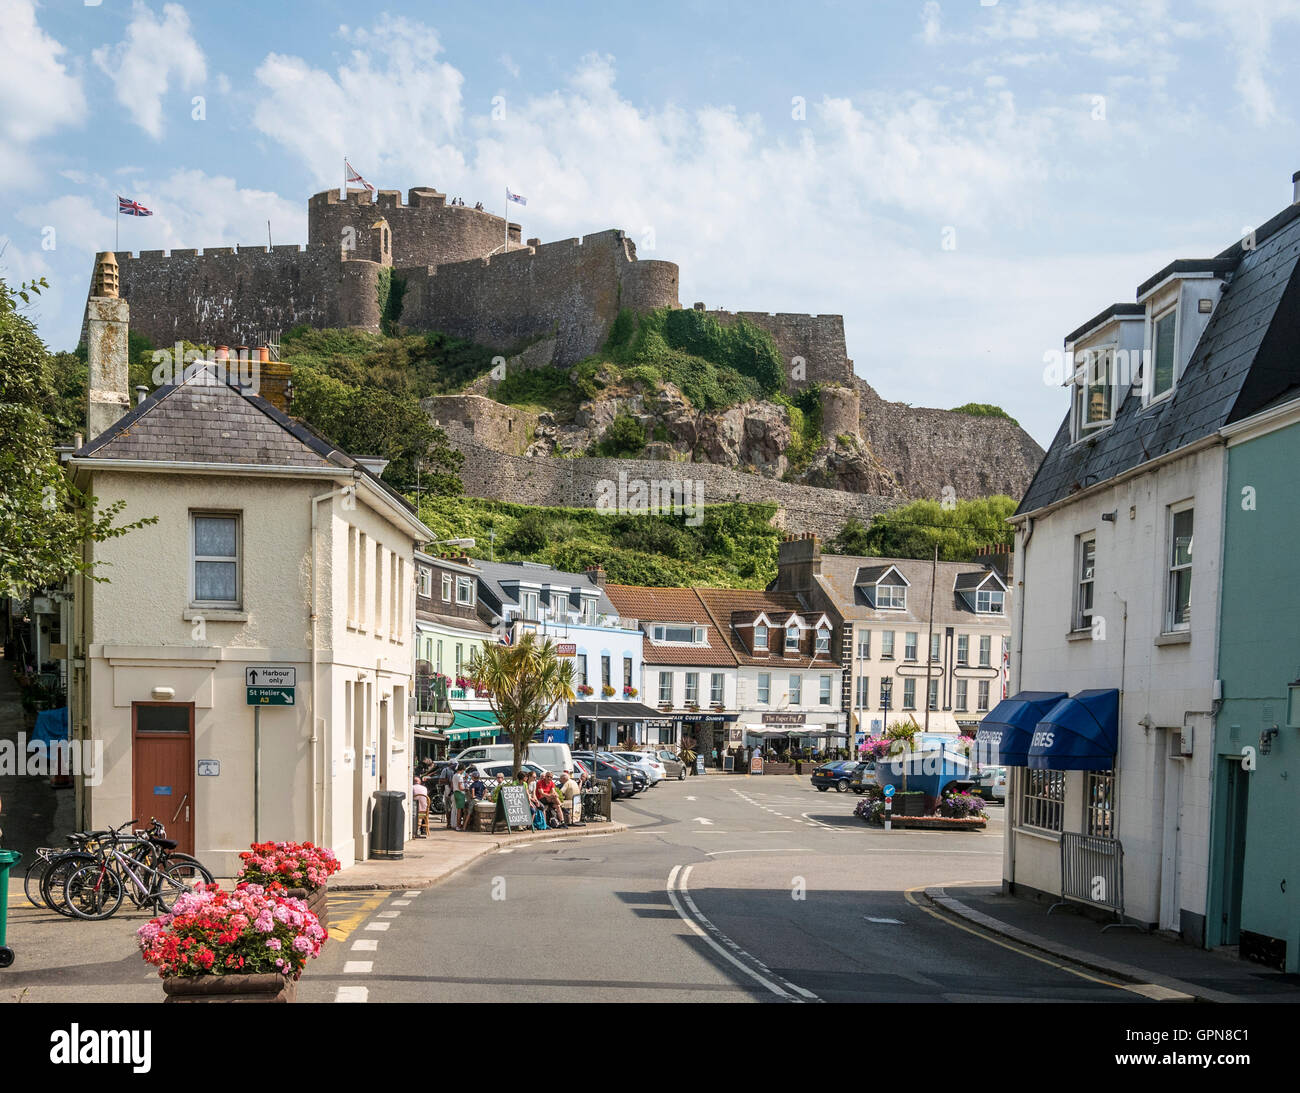 Castle Street Jersey High Resolution Stock Photography and Images - Alamy